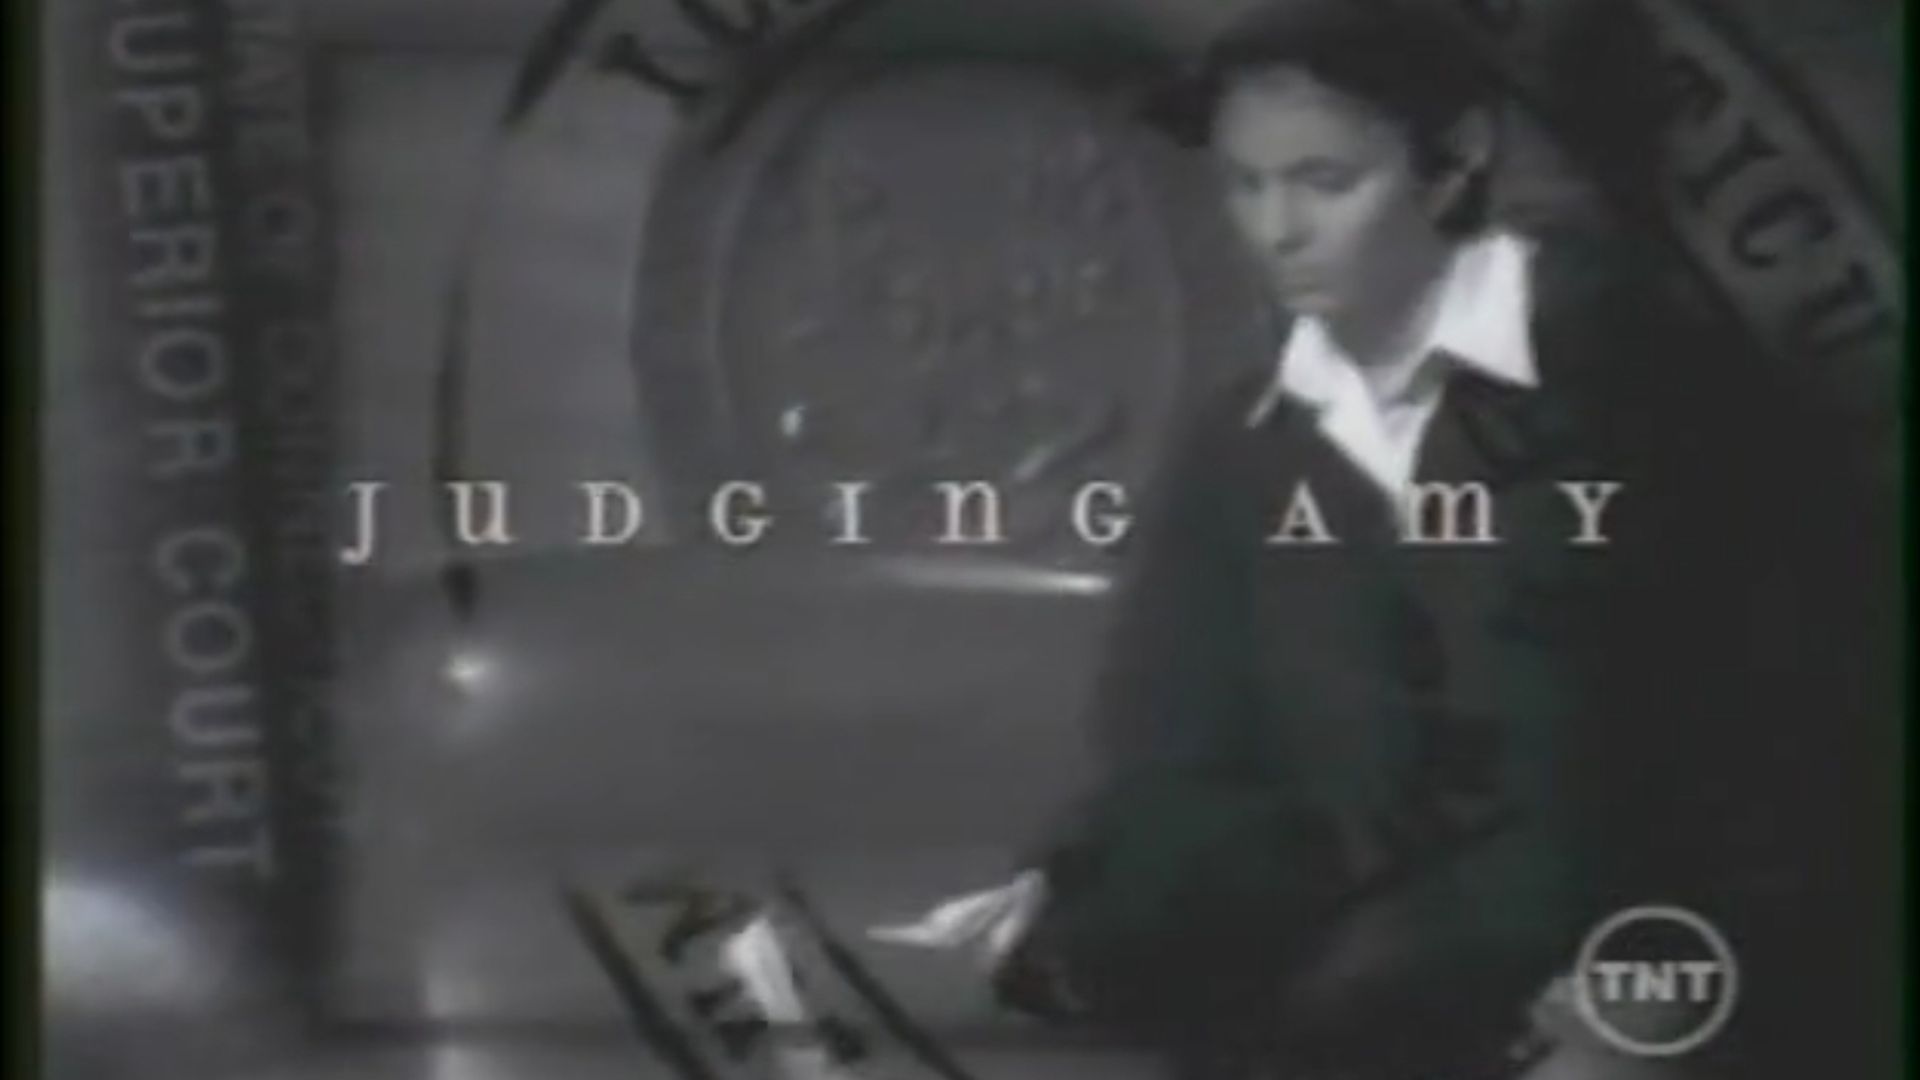 Judging Amy background